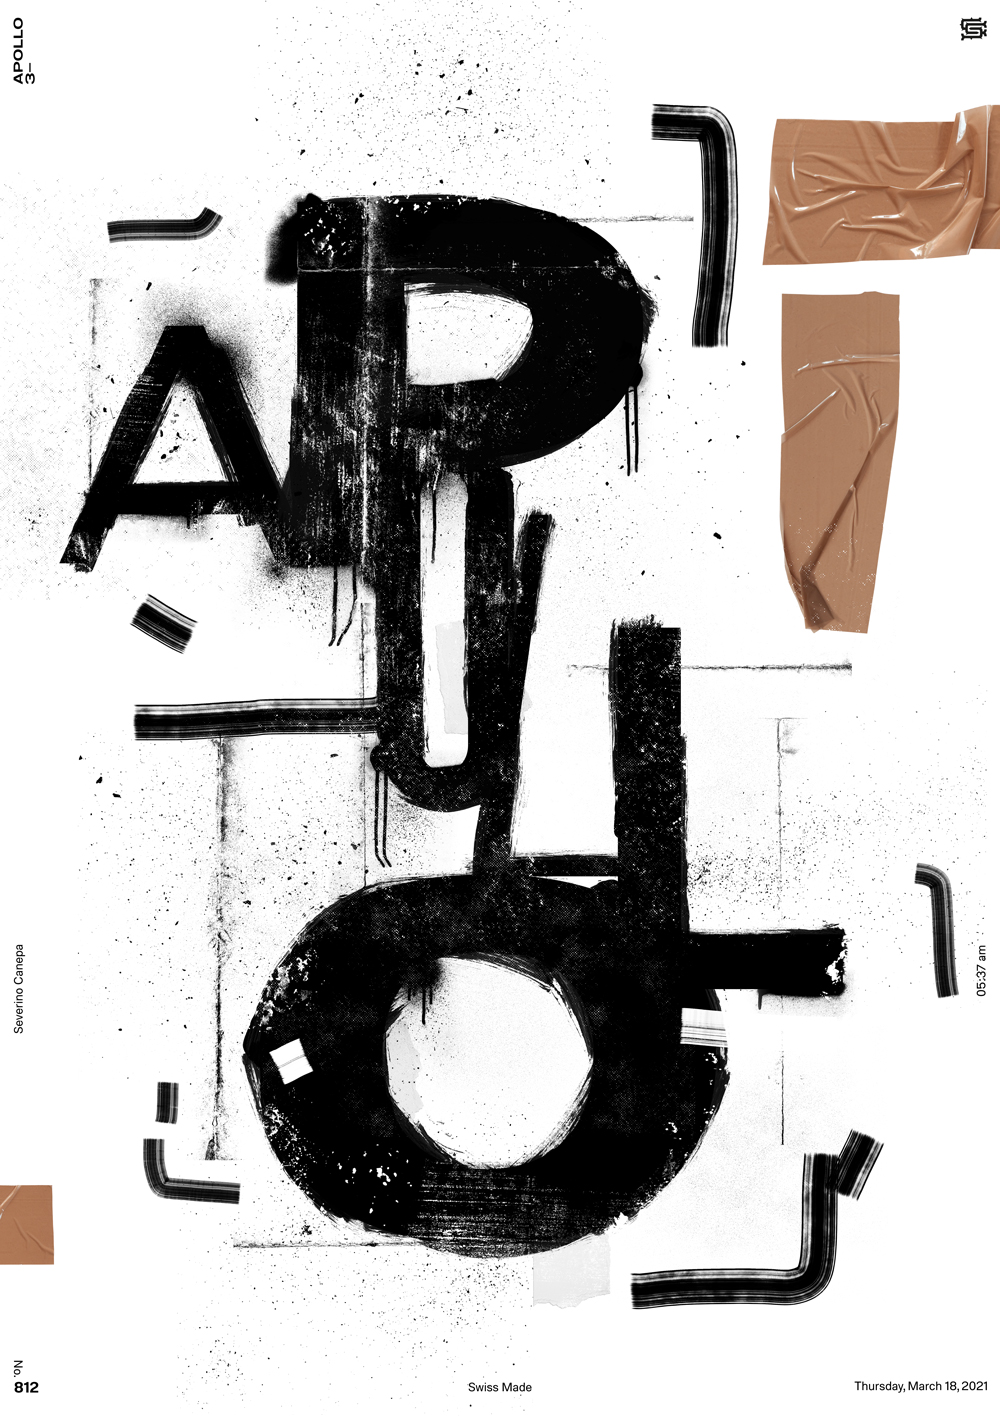 Minimalist and dirty typographic composition made with textures, brushes, and duct tape